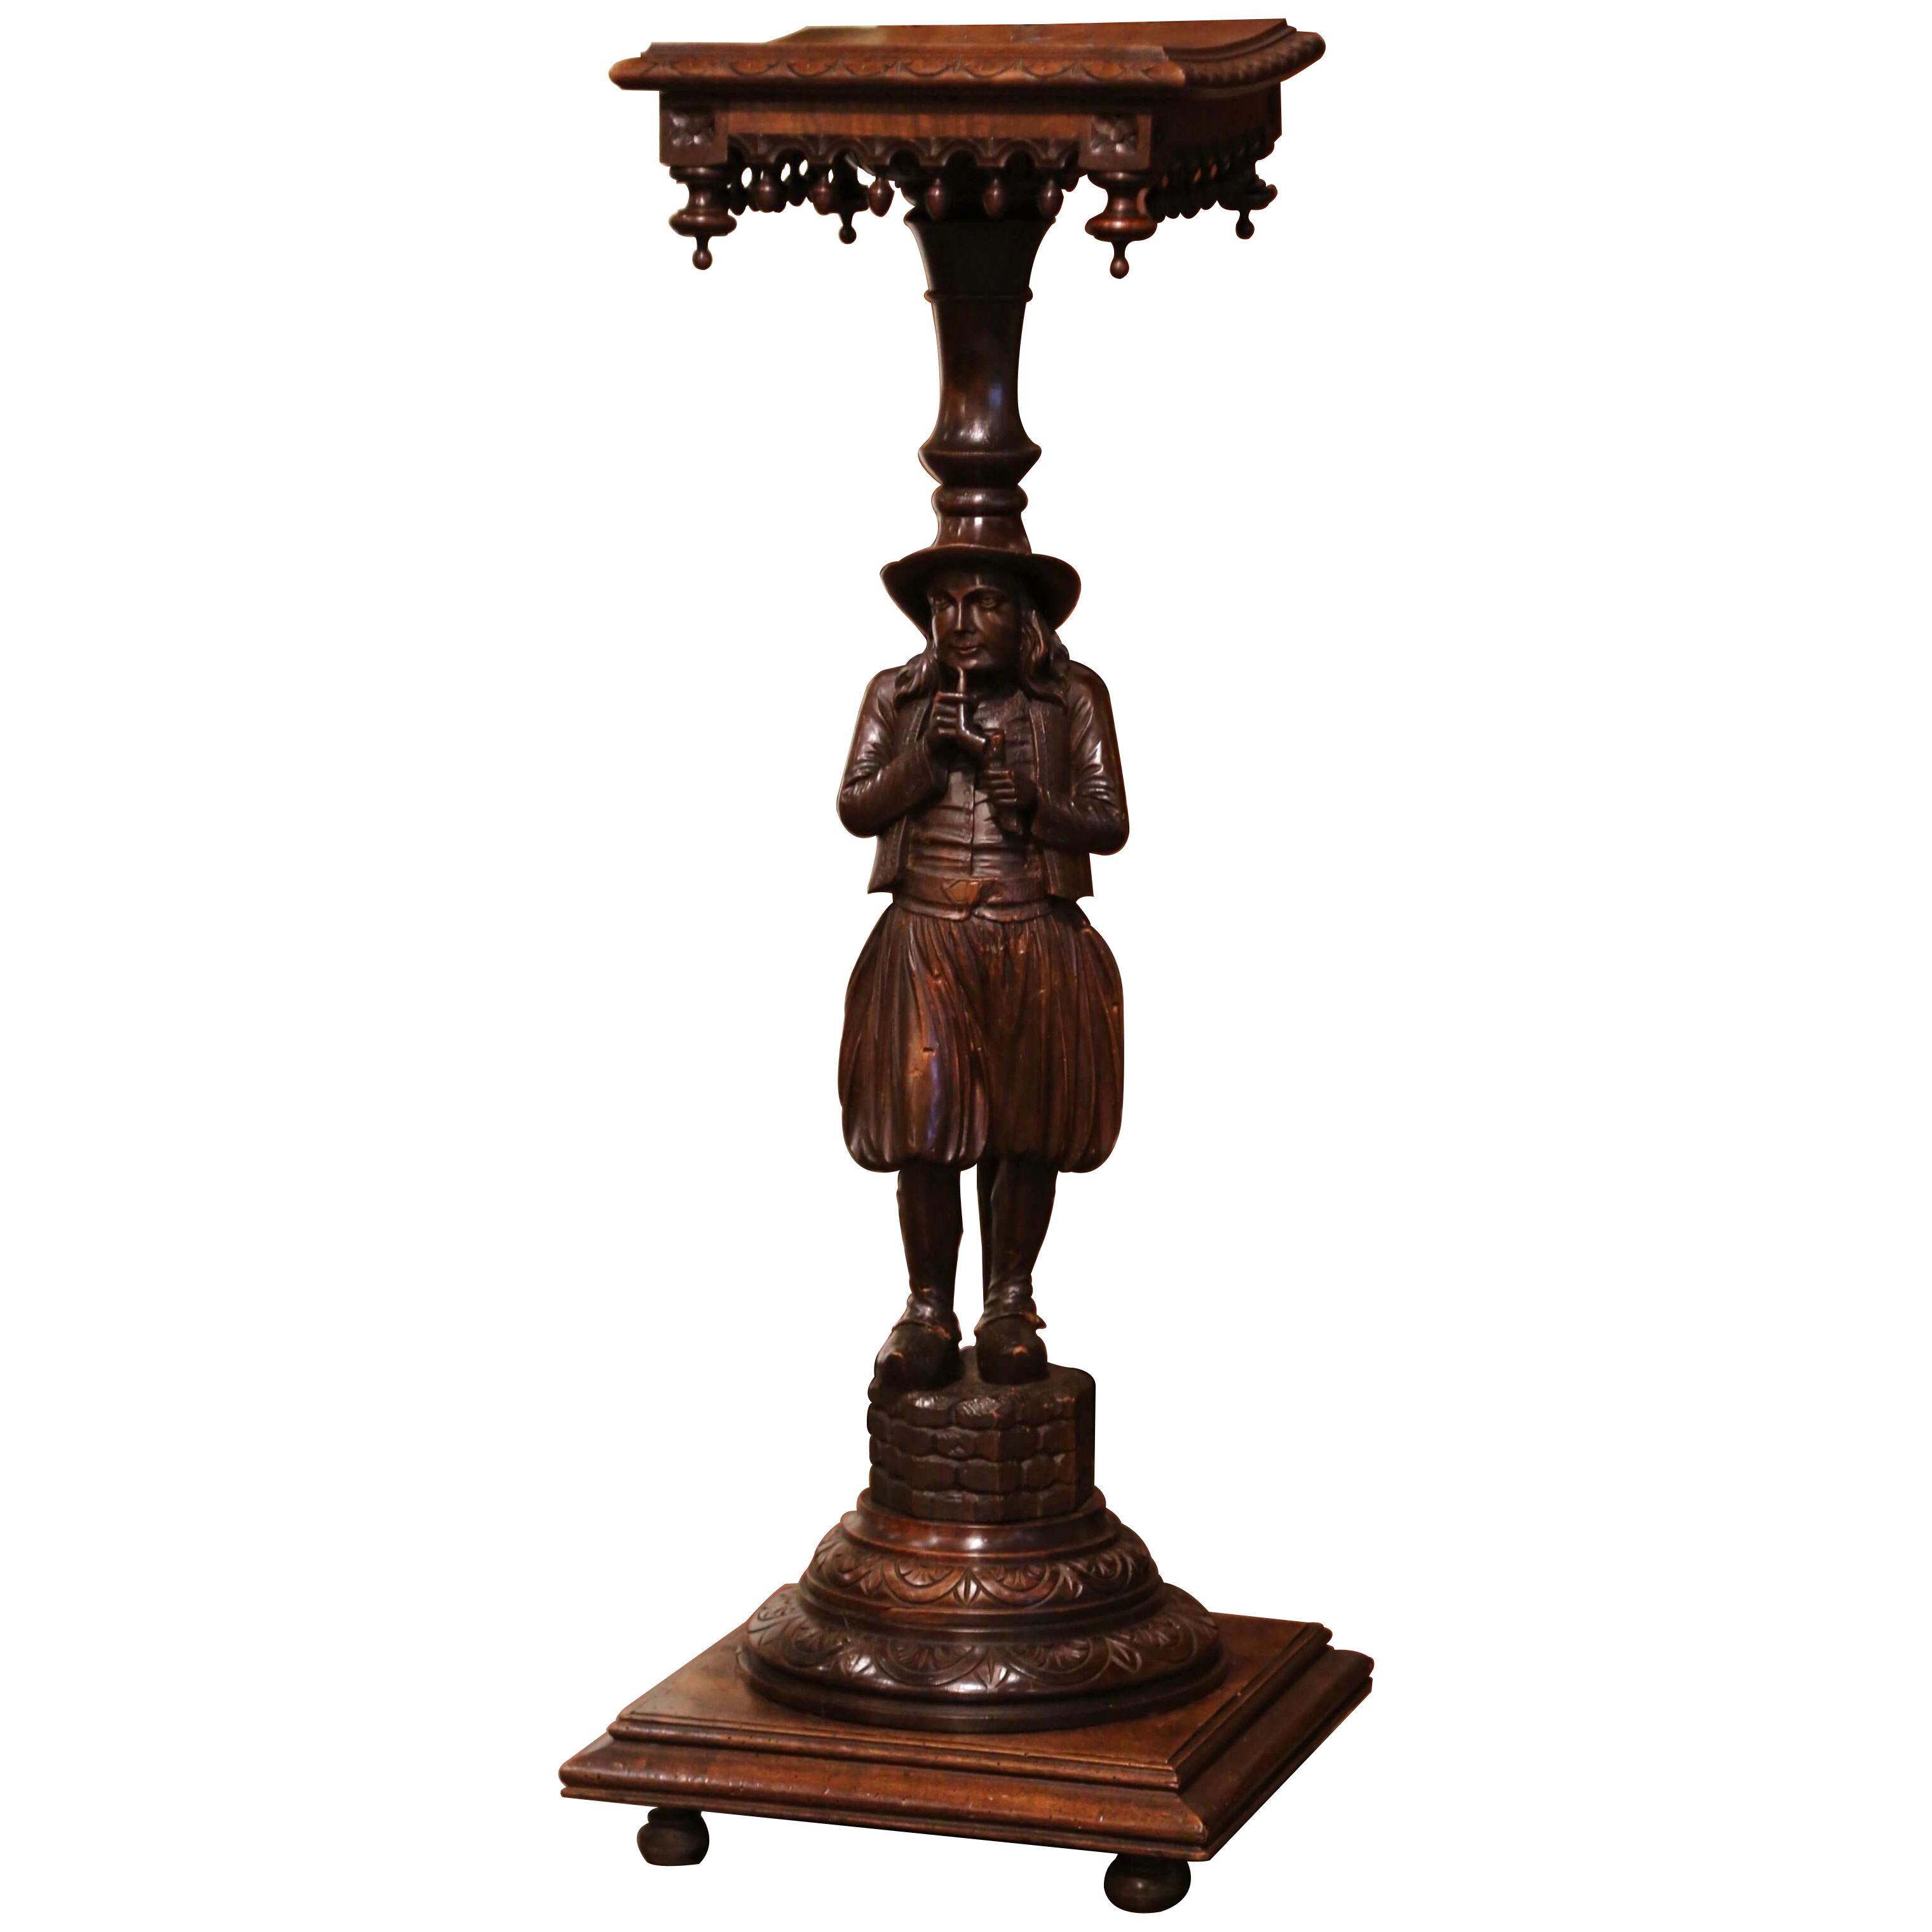 19th Century French Carved Chestnut Pedestal Table with Breton Man Figure